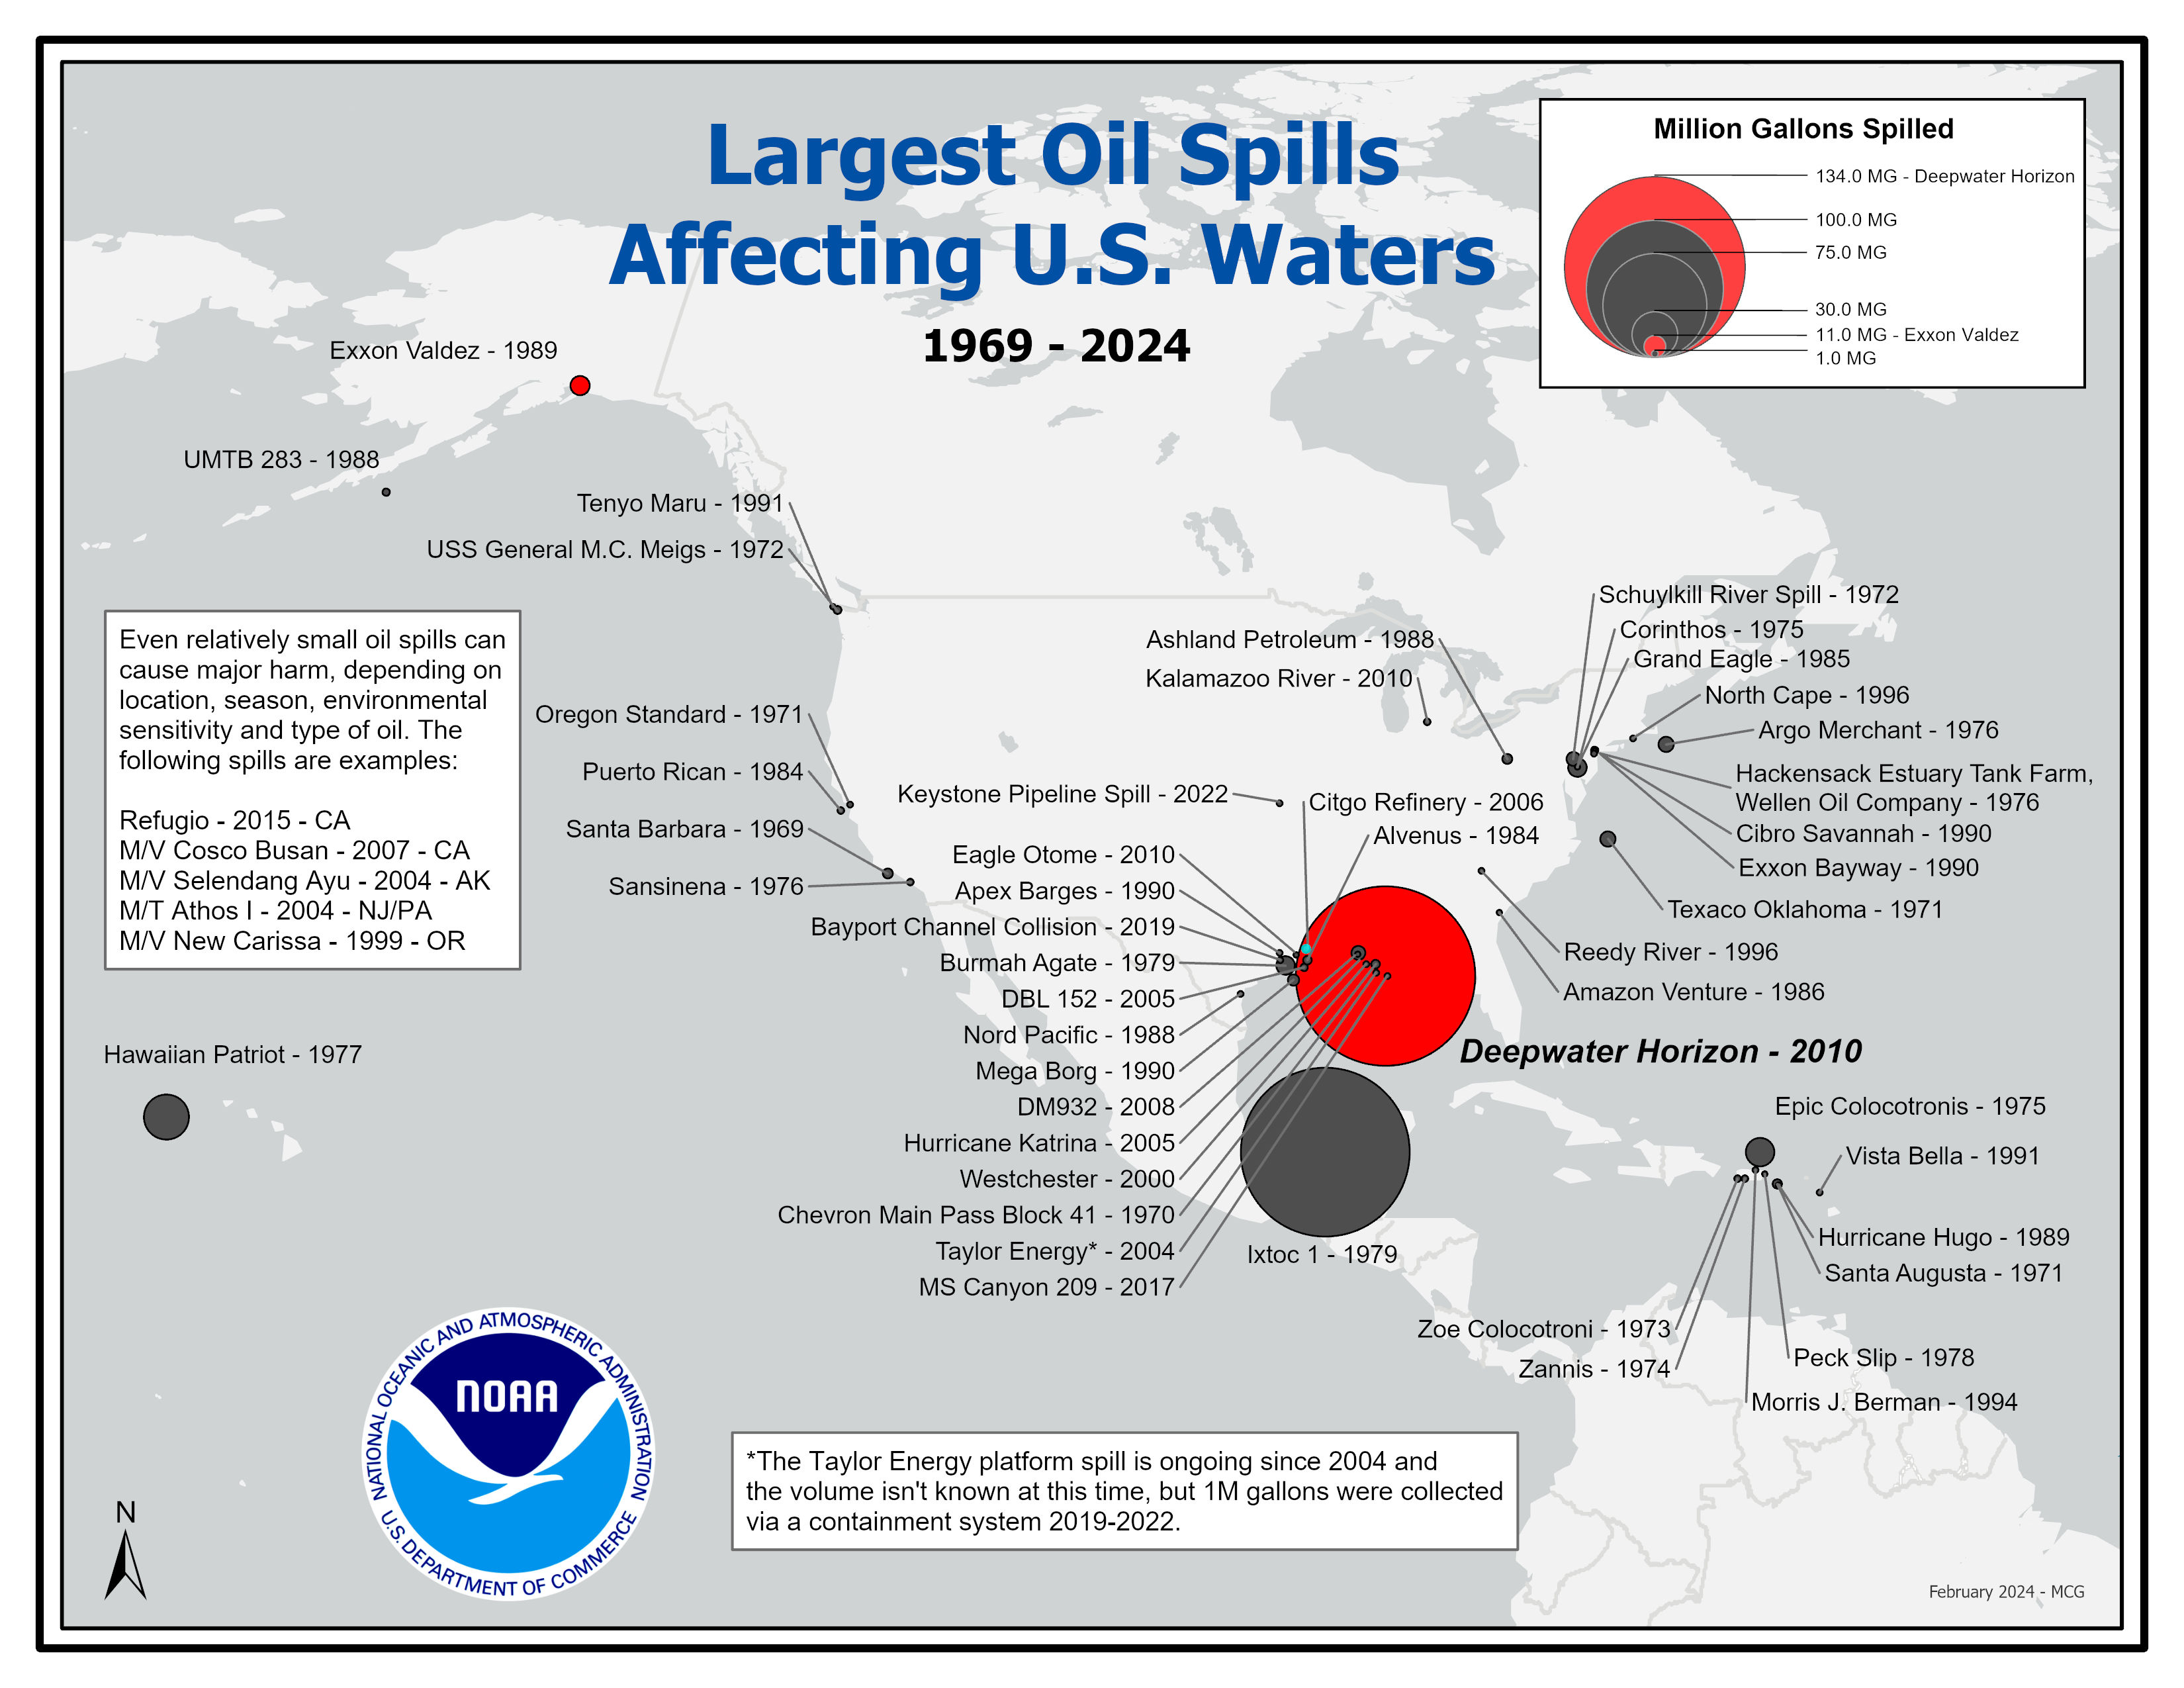 A map showing the Largest Oil Spills Affecting U.S. Waters from 1969 - 2024. 49 oil spills are shown, affecting coastal waters in Alaska, down the West Coast, off Hawaii, the Gulf of Mexico and Caribbean, the East Coast, and the Great Lakes. More information can be found at https://response.restoration.noaa.gov/oil-and-chemical-spills/oil-spills/largest-oil-spills-affecting-us-waters-1969.html.